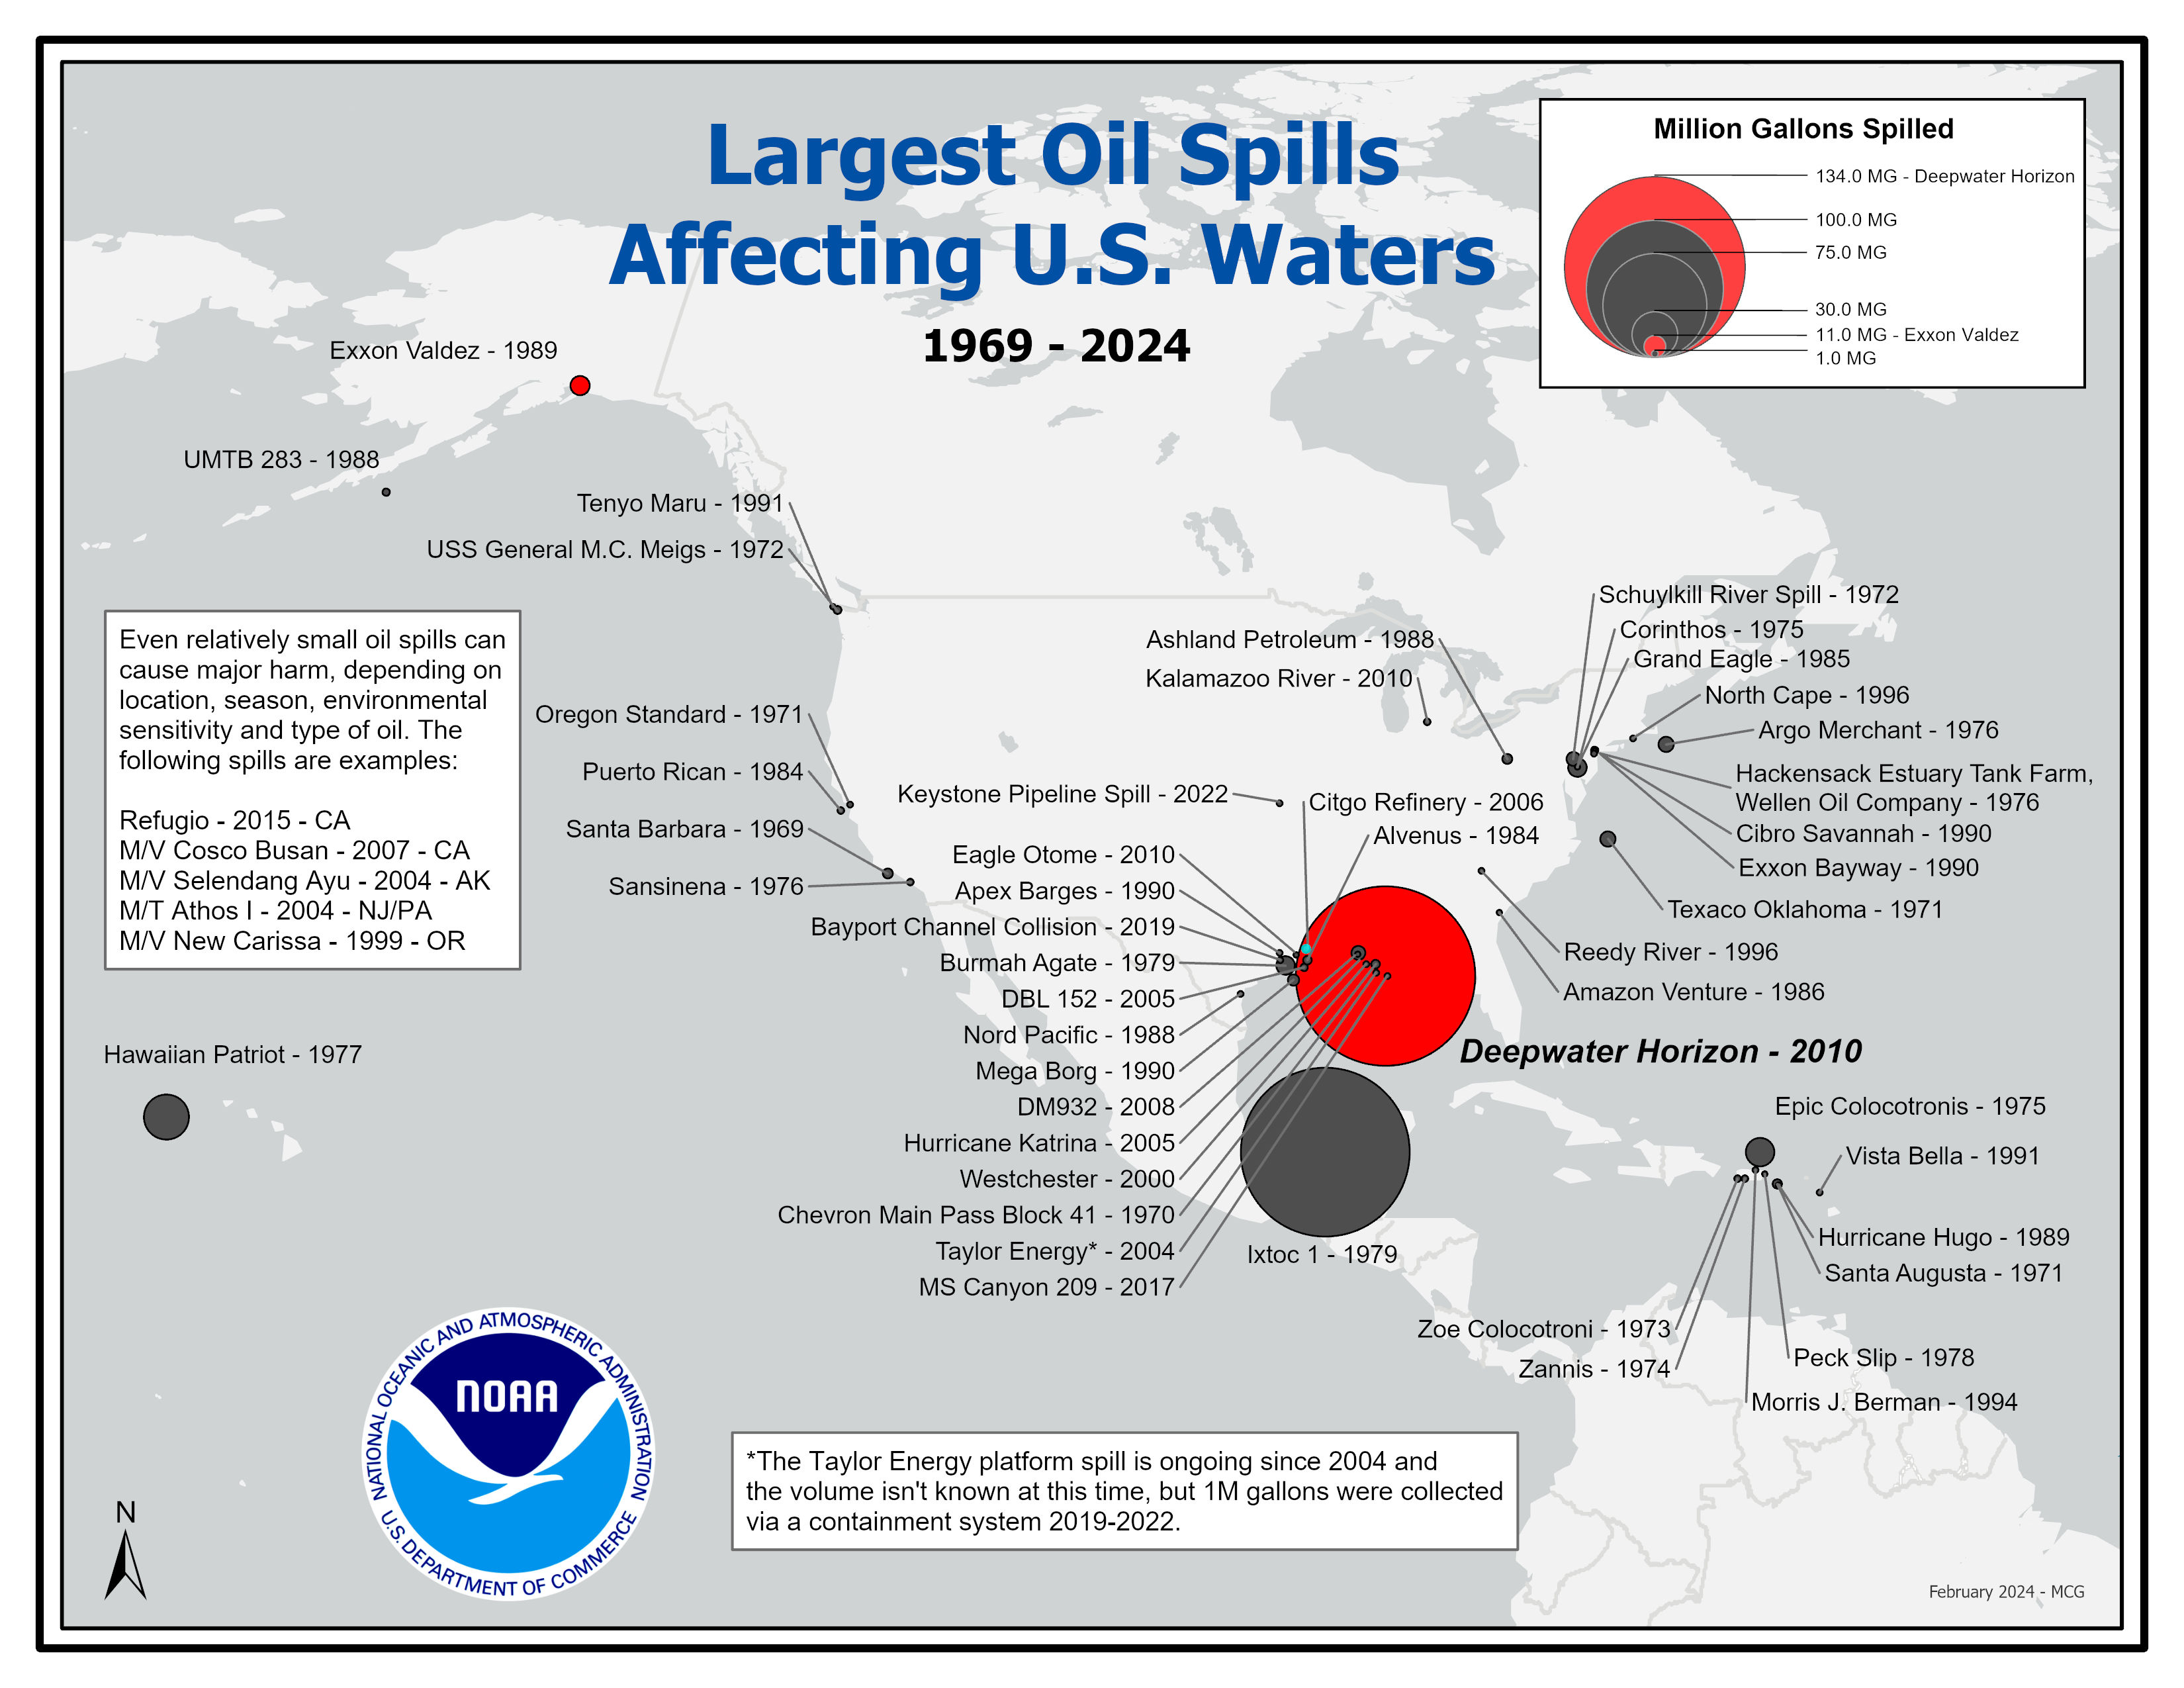 A map showing the Largest Oil Spills Affecting U.S. Waters from 1969 - 2024. 49 oil spills are shown, affecting coastal waters in Alaska, down the West Coast, off Hawaii, the Gulf of Mexico and Caribbean, the East Coast, and the Great Lakes. More information can be found at https://response.restoration.noaa.gov/oil-and-chemical-spills/oil-spills/largest-oil-spills-affecting-us-waters-1969.html.